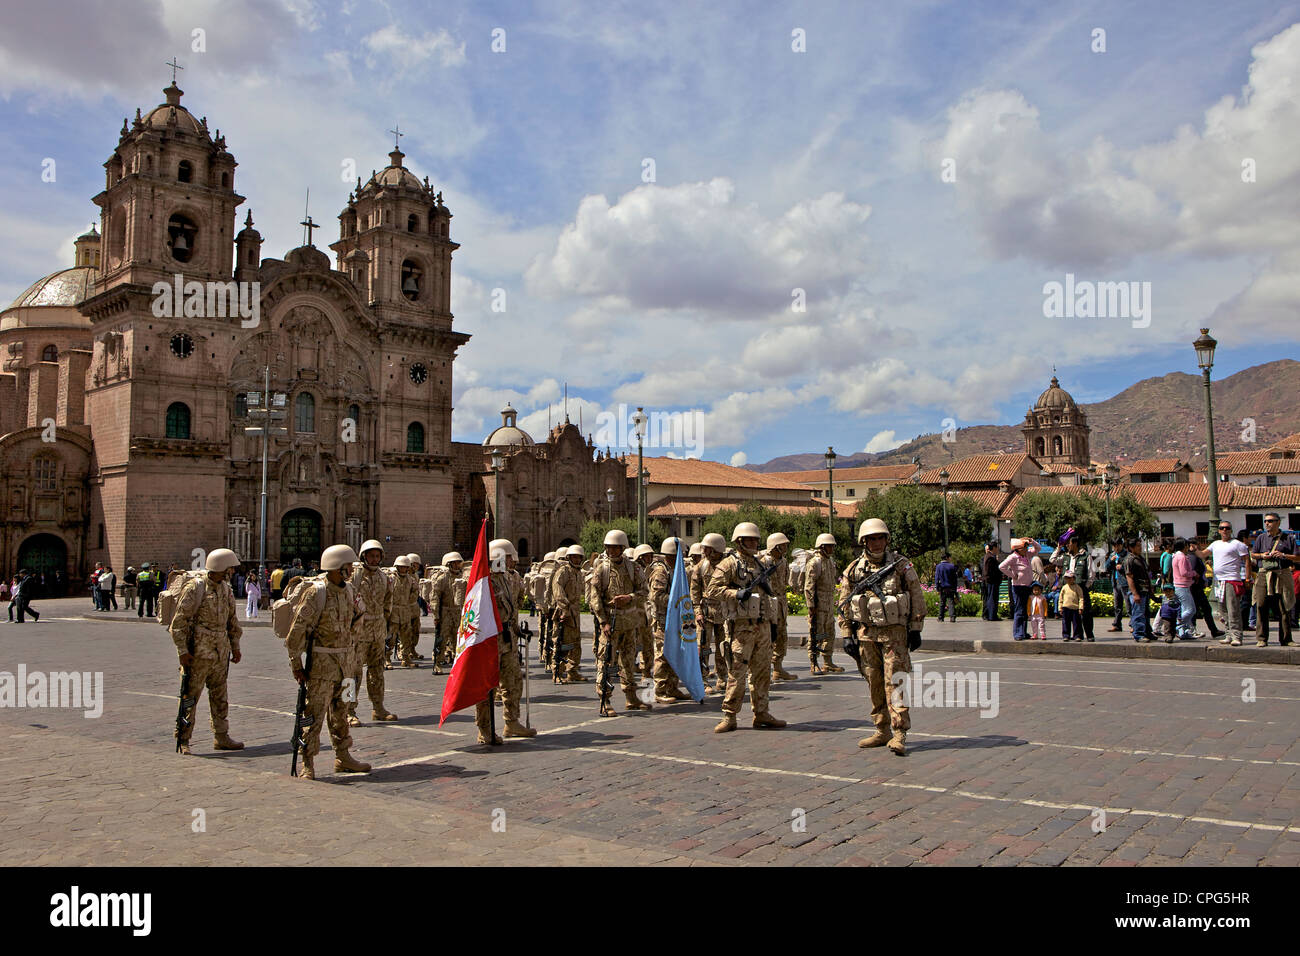 A military parade on the streets of Cusco, Peru Stock Photo